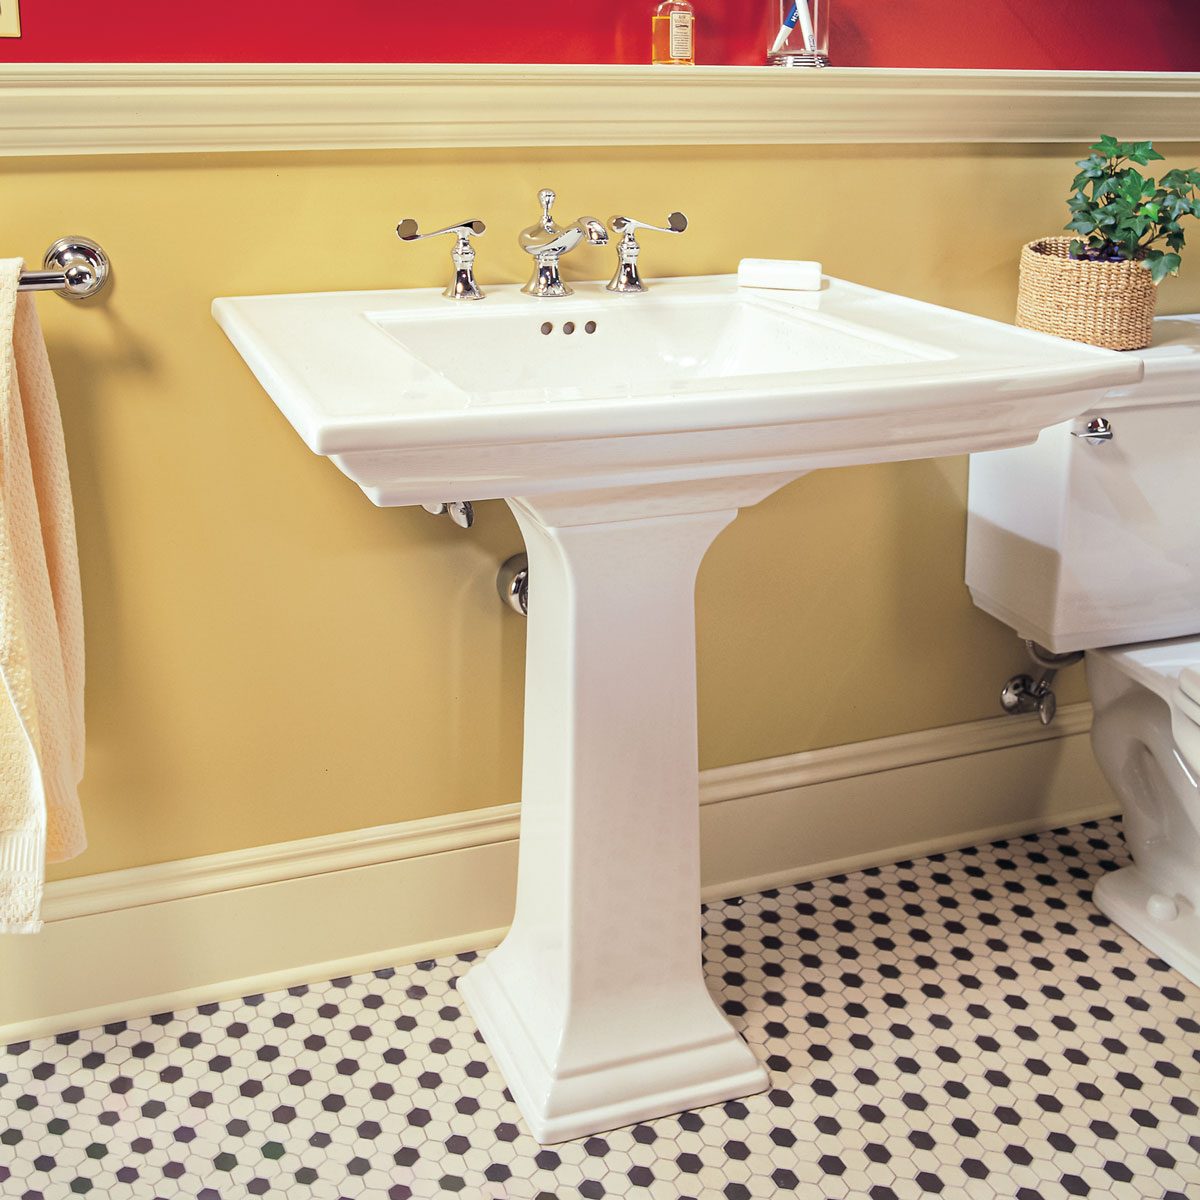 Are Bathroom Pedestal Sinks Outdated?